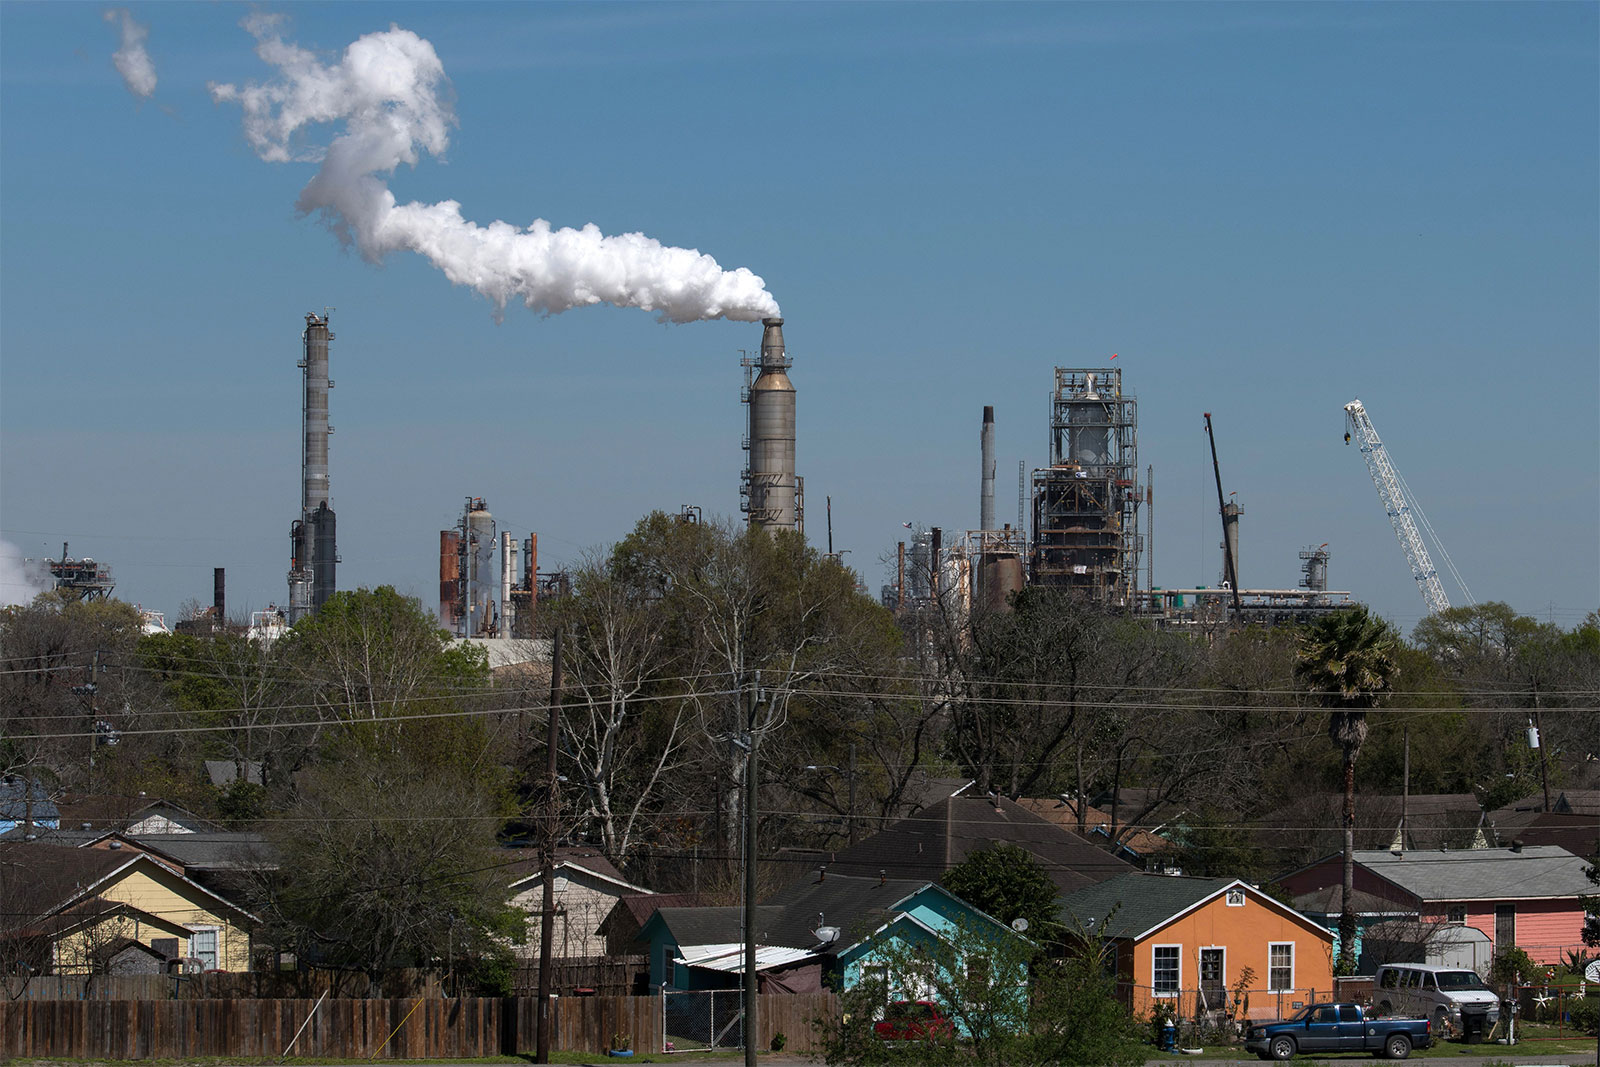 The Valero oil refinery near the Houston Ship Channel, part of the Port of Houston, on March 6, 2019 in Houston, Texas